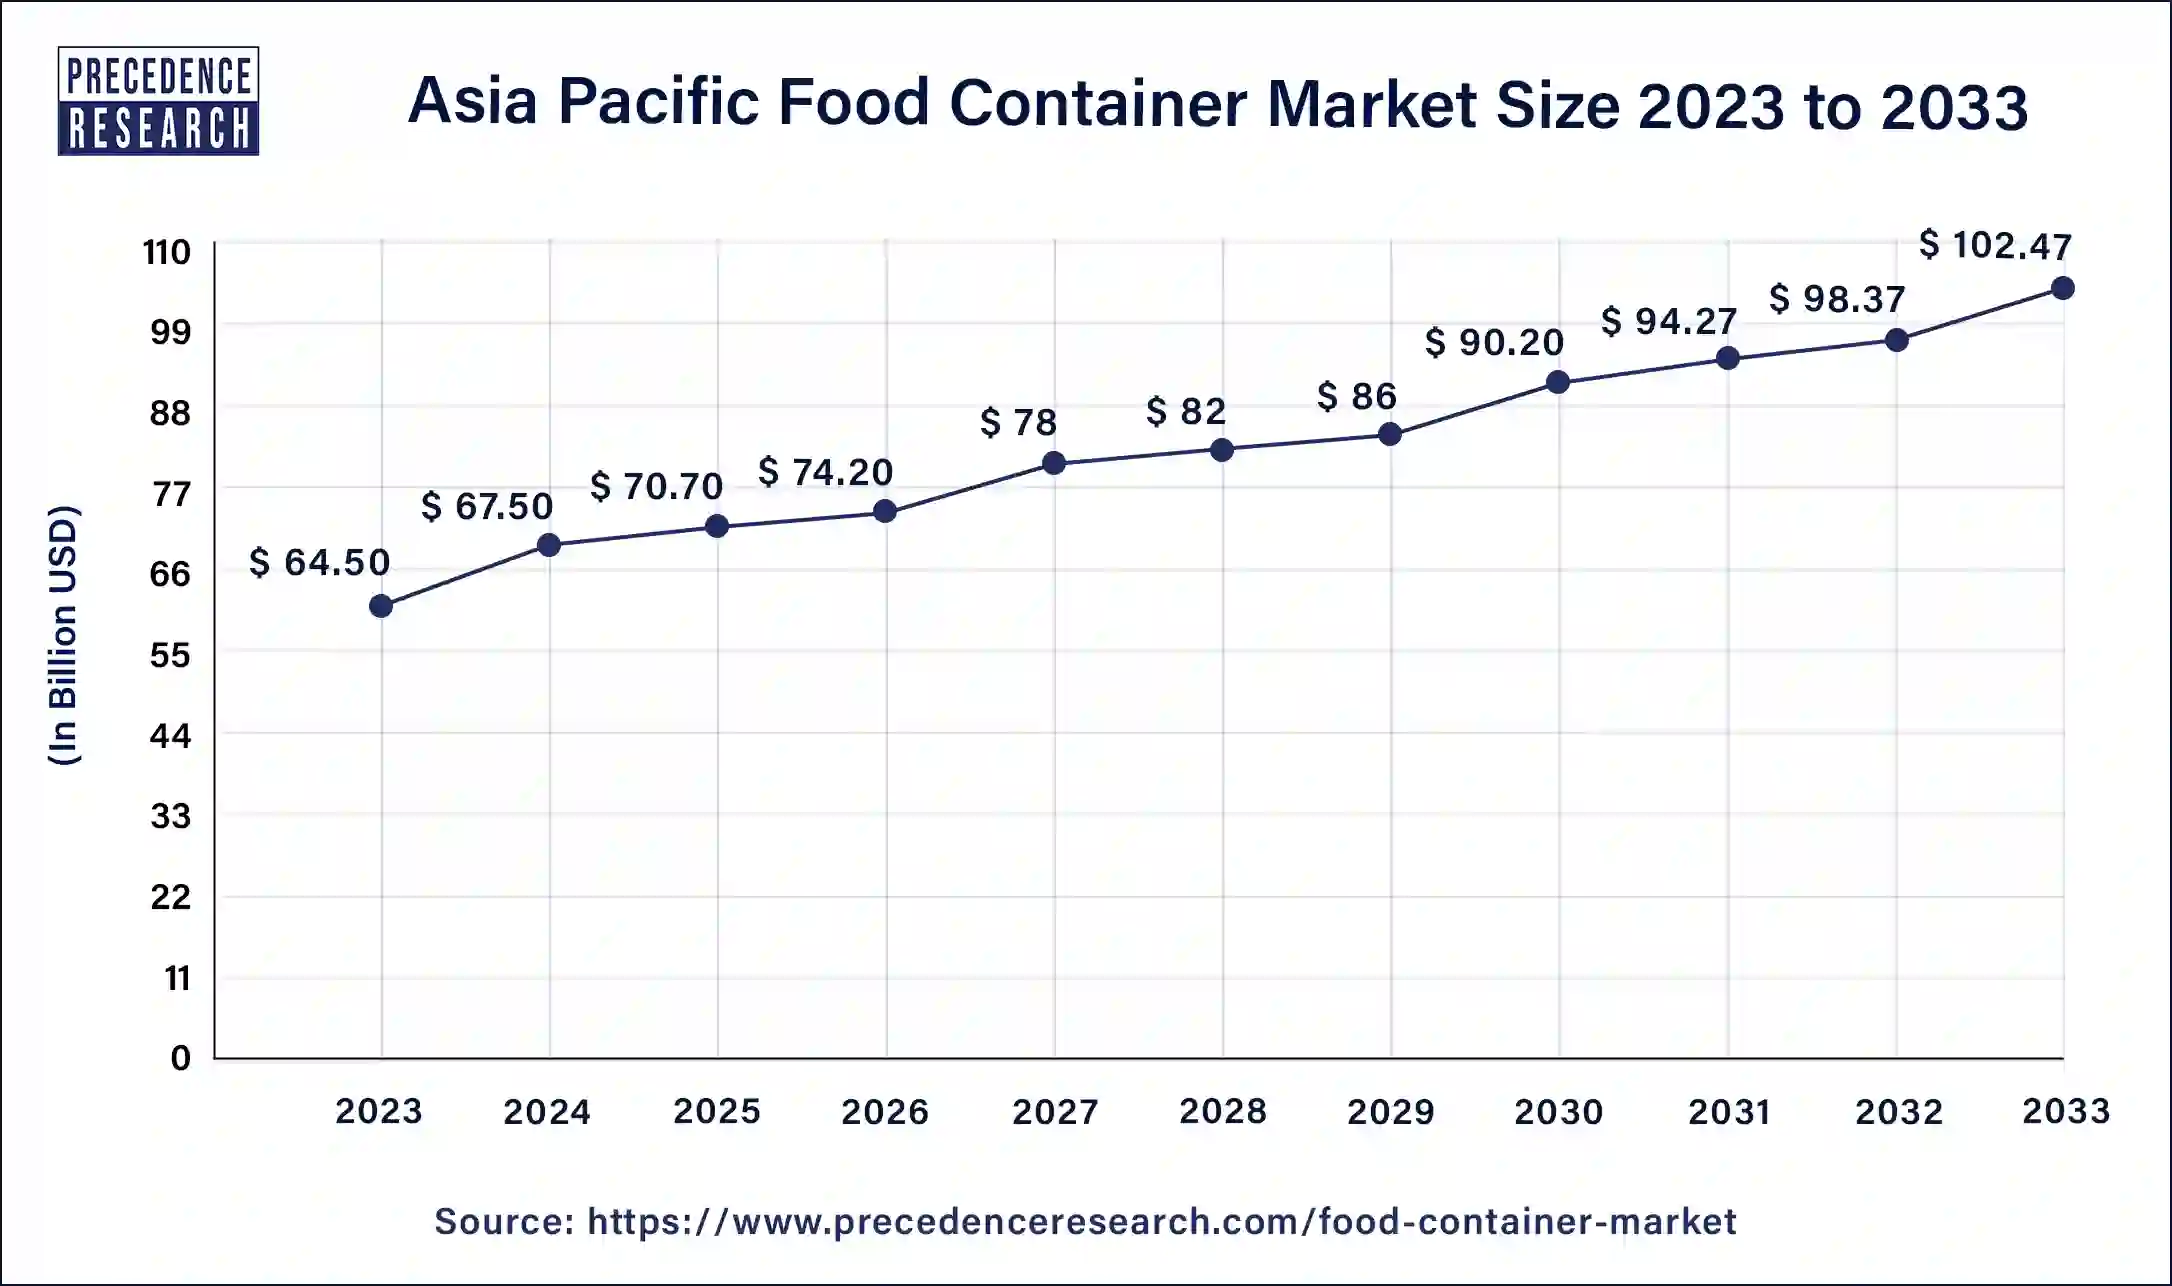 U.S. Food Container Market Size 2024 to 2033